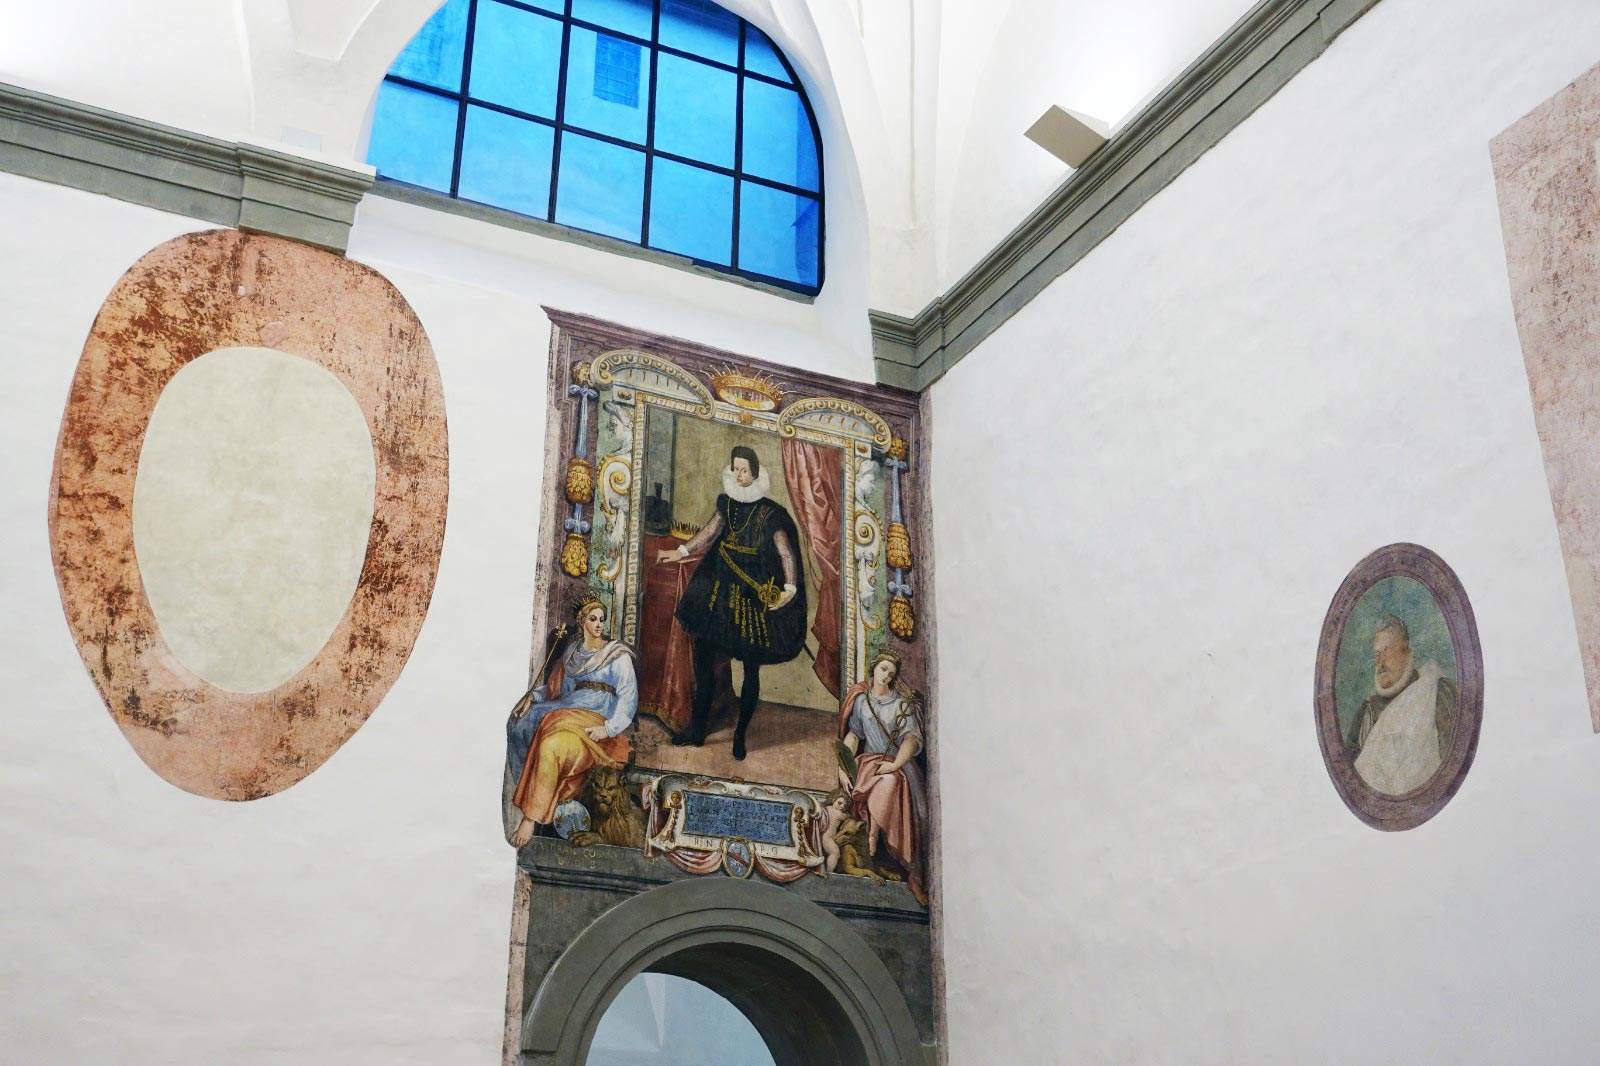 Uffizi, 17th-century frescoes re-emerge from work that will revolutionize the entrance